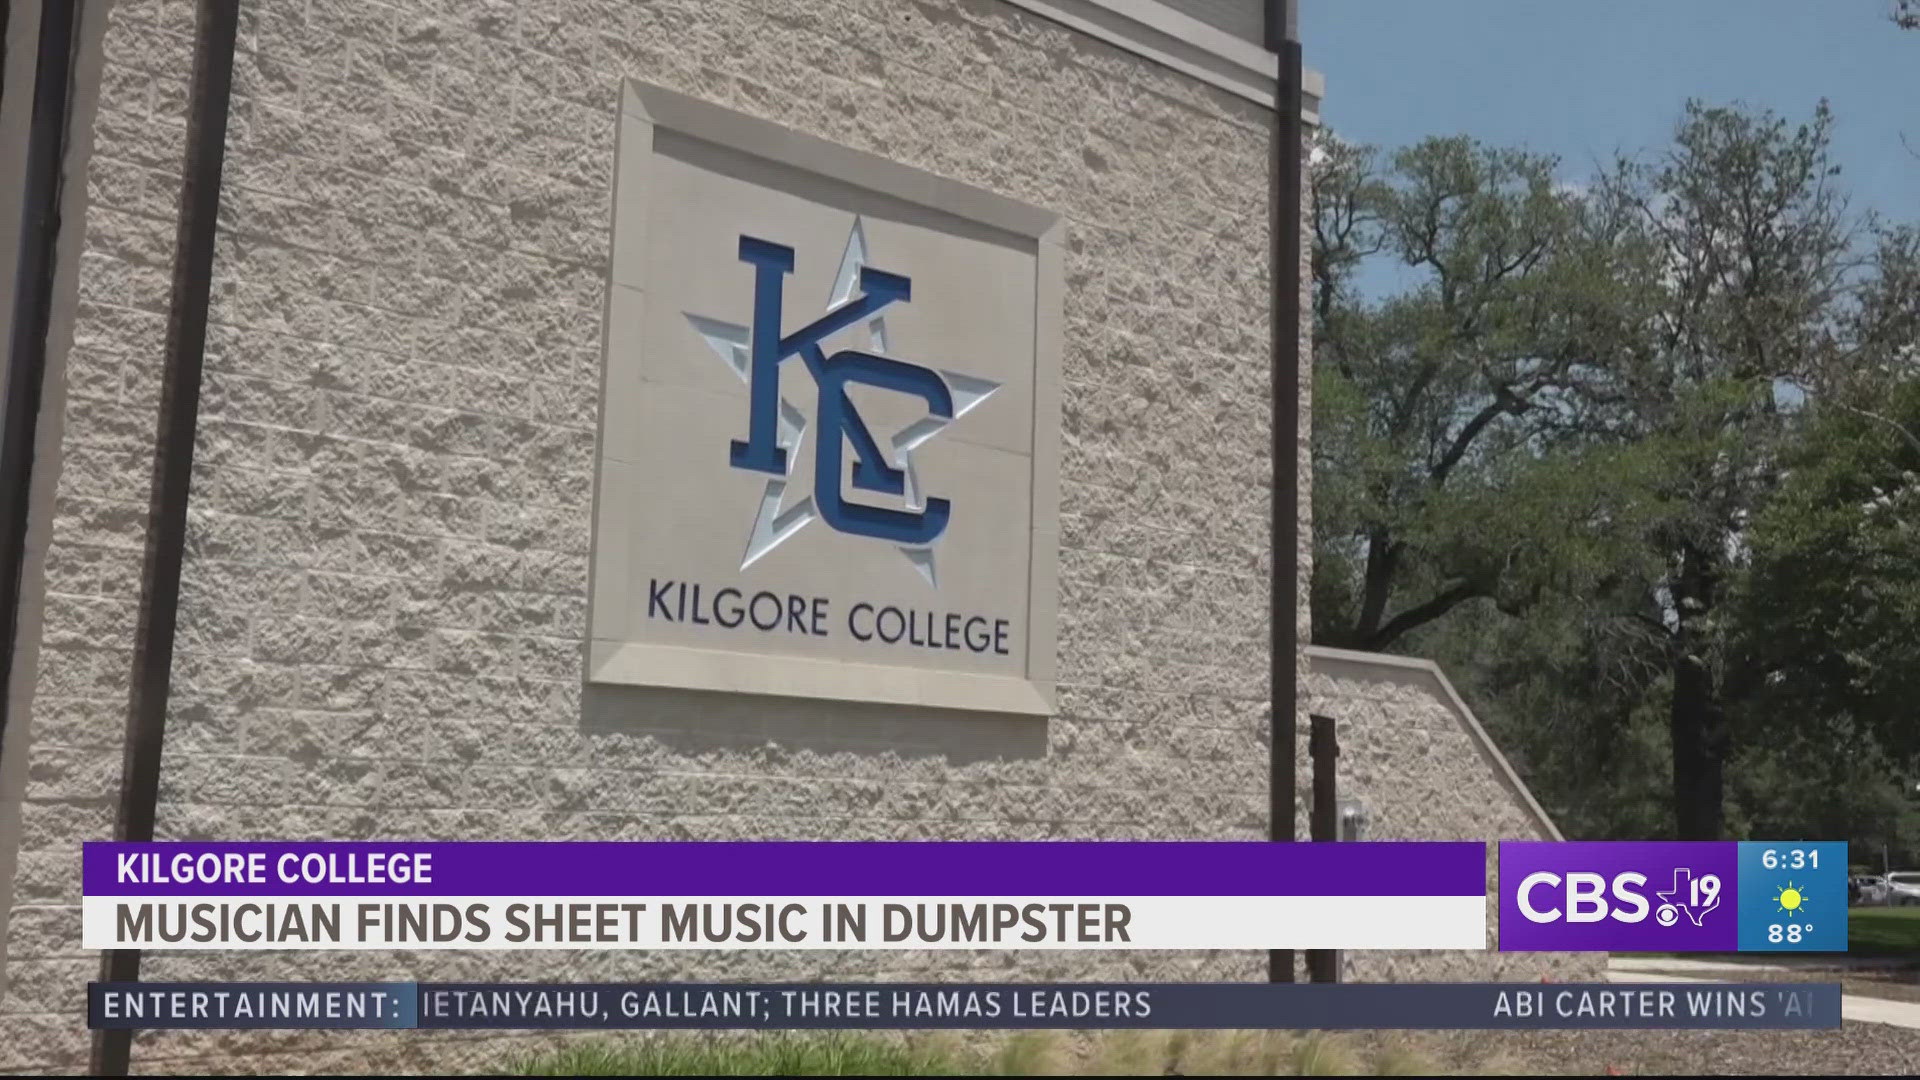 "The college is not eliminating its music library nor is it reducing or eliminating any of its fine arts programs," KC said in a statement.